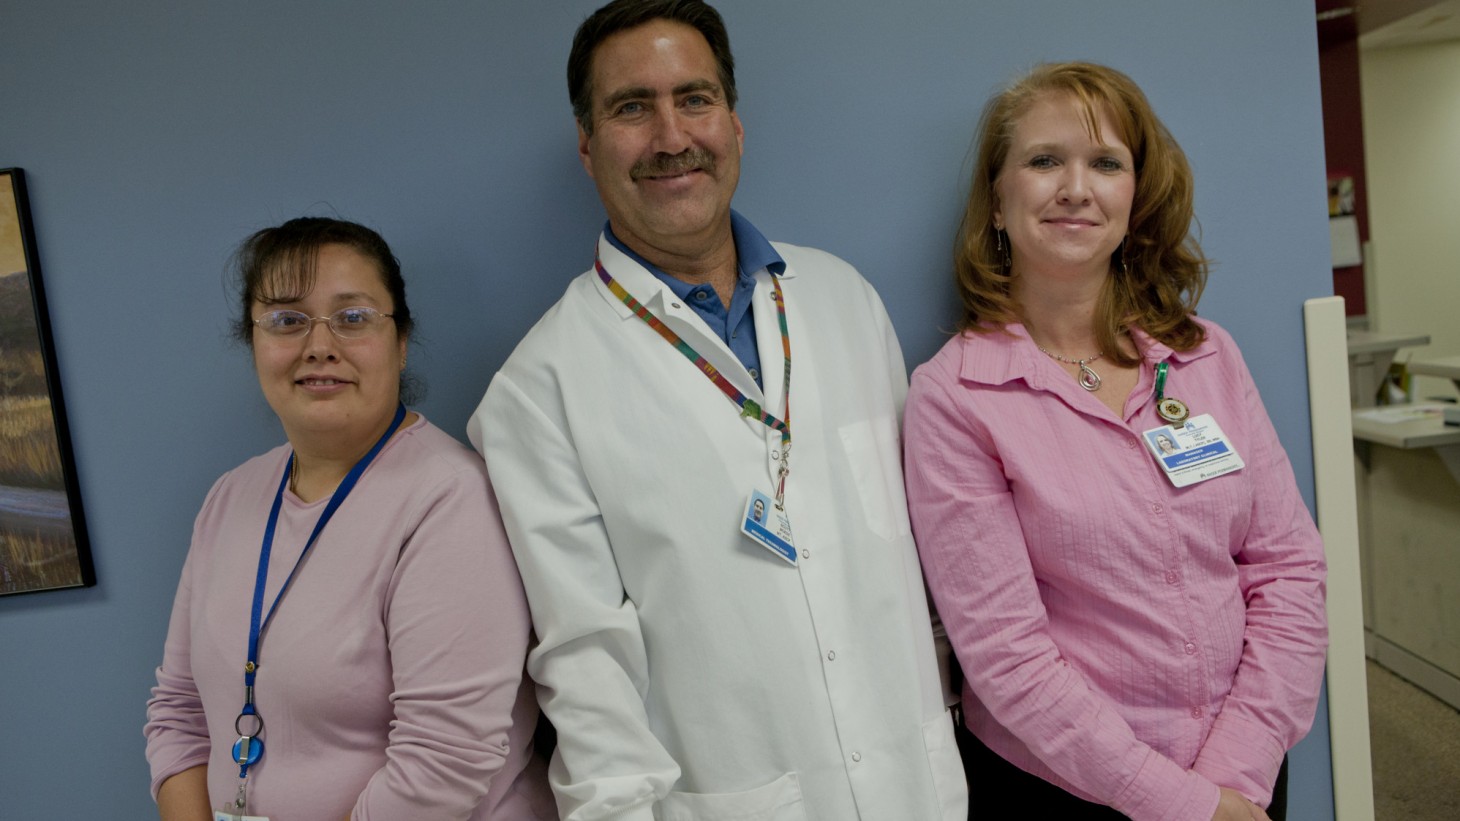 Group portrait of three health care workers 